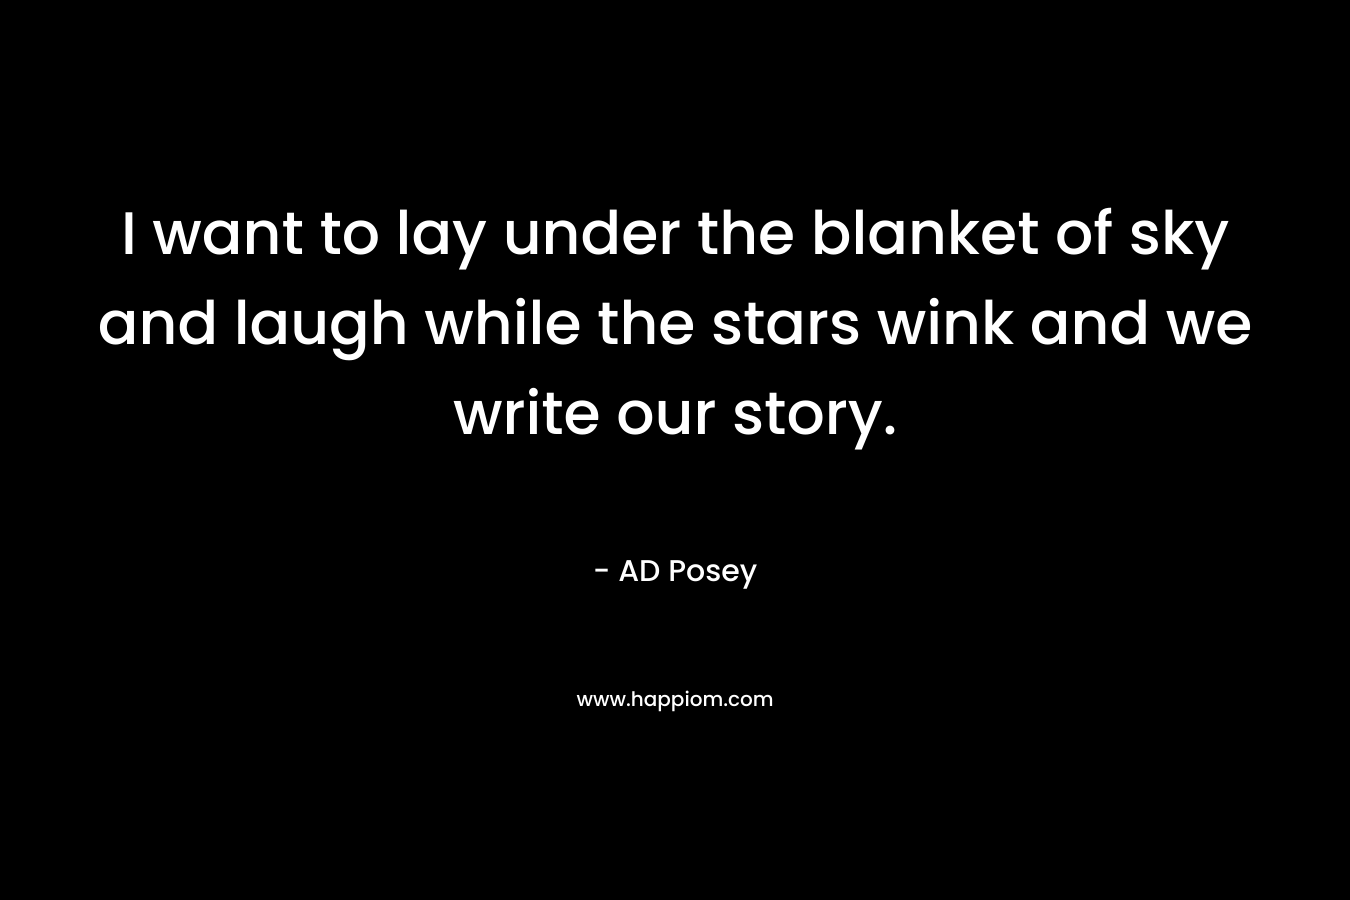 I want to lay under the blanket of sky and laugh while the stars wink and we write our story. – AD Posey